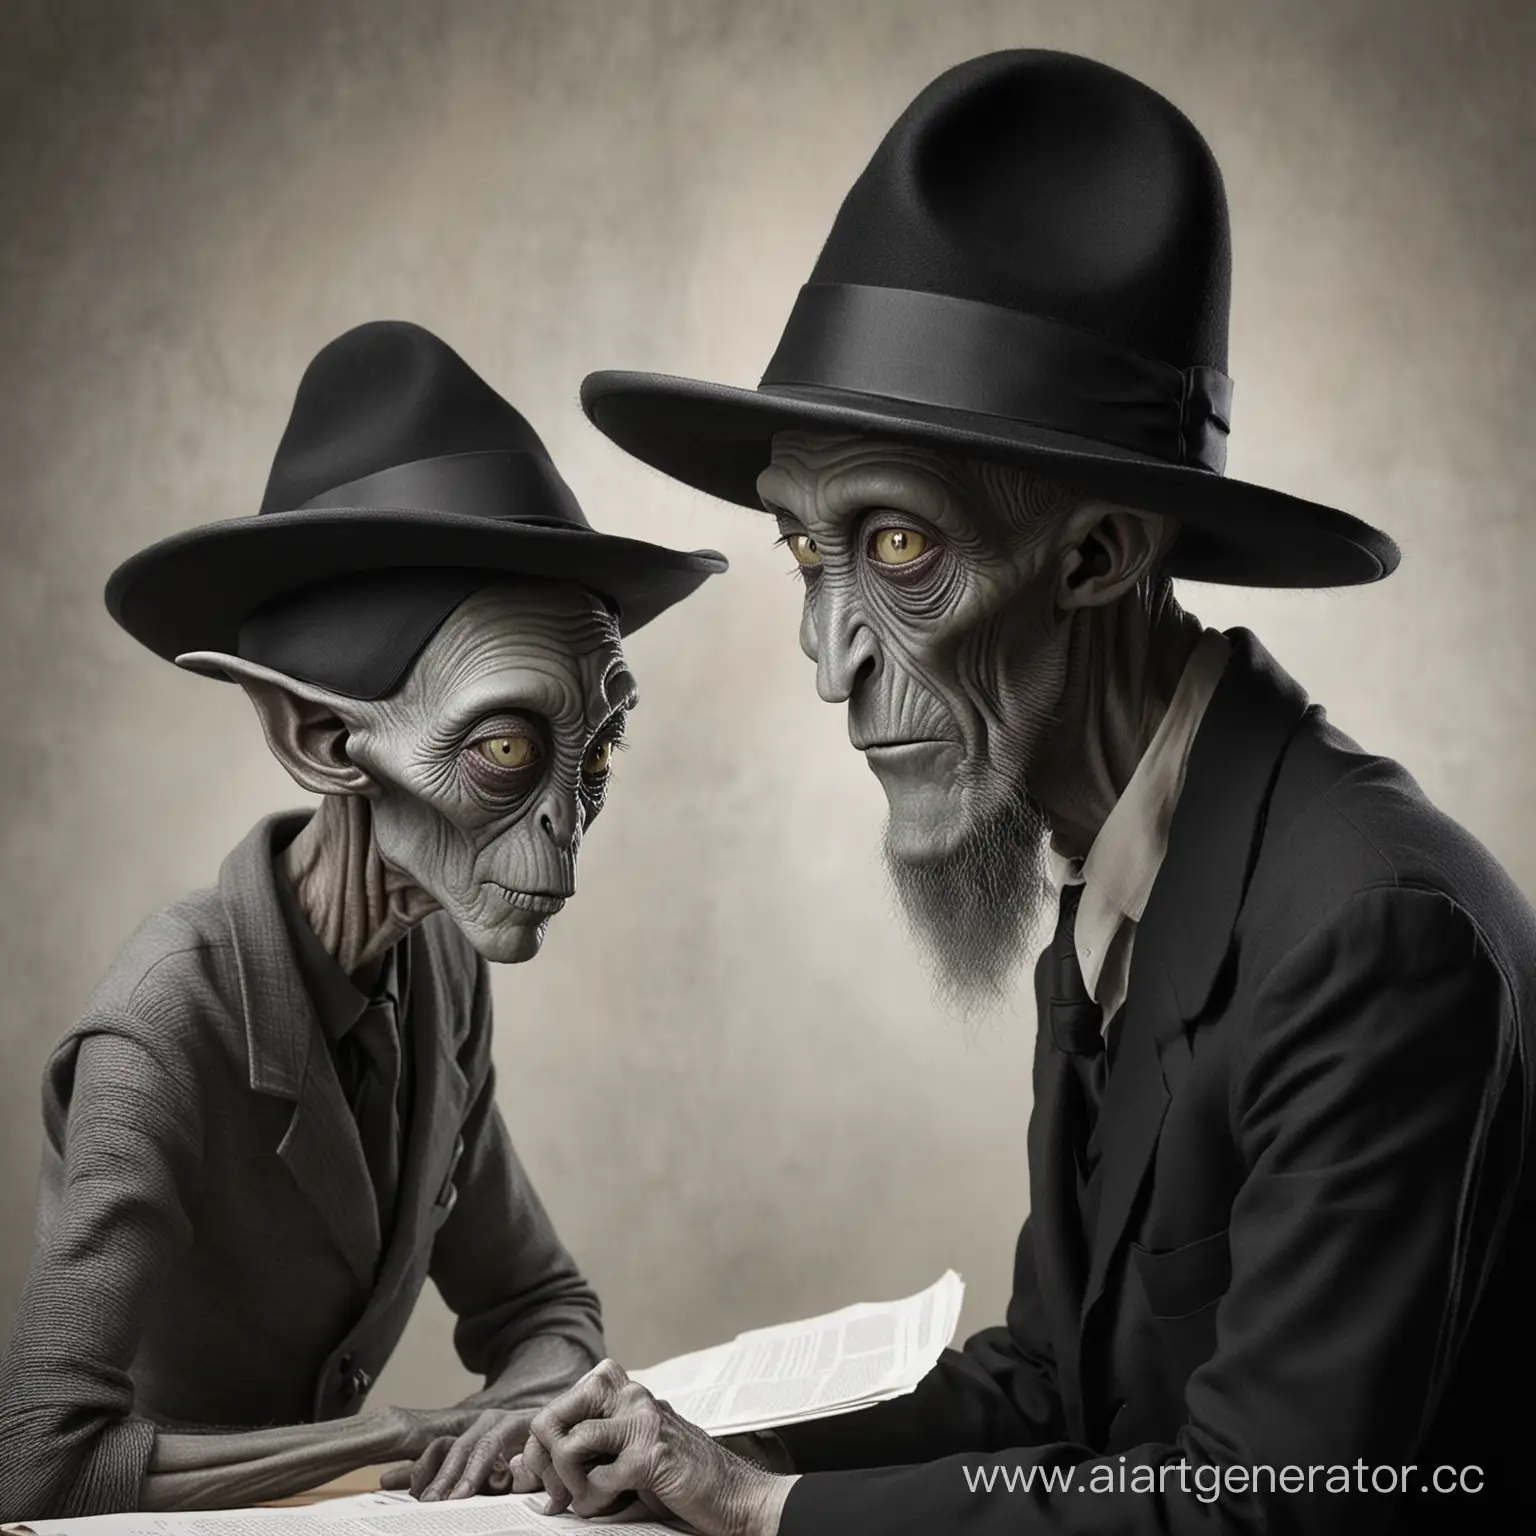 A gray alien whispers a plan of action in the ear of a Jew in a black hat